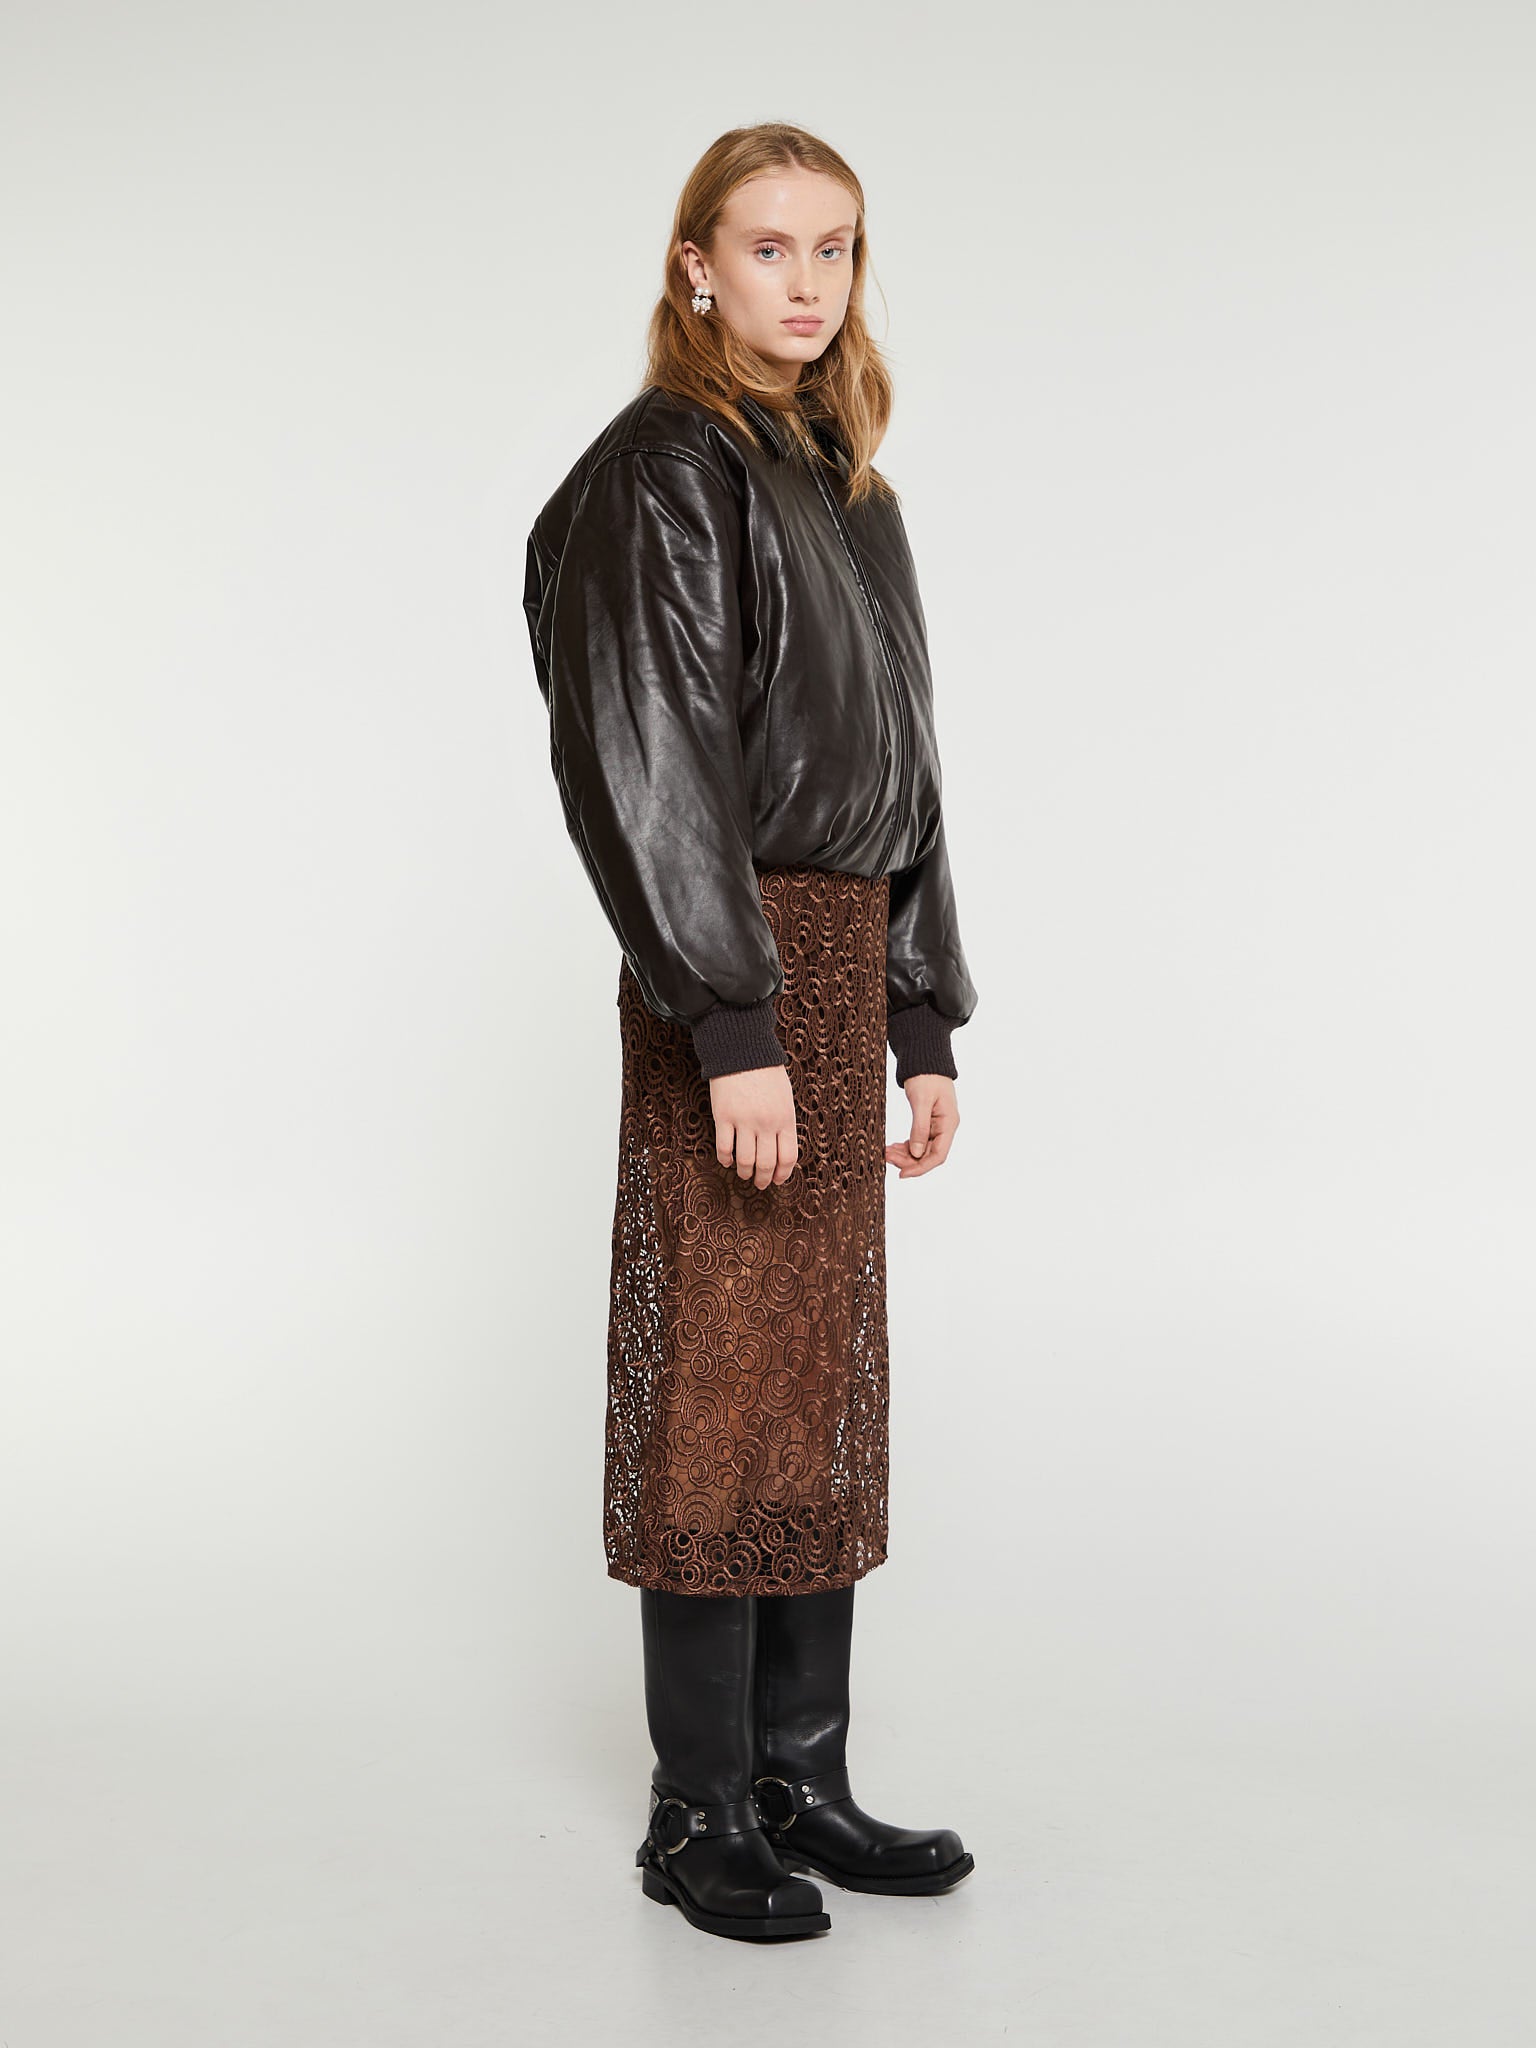 stoy | the women Coats selection Shop for at Jackets &